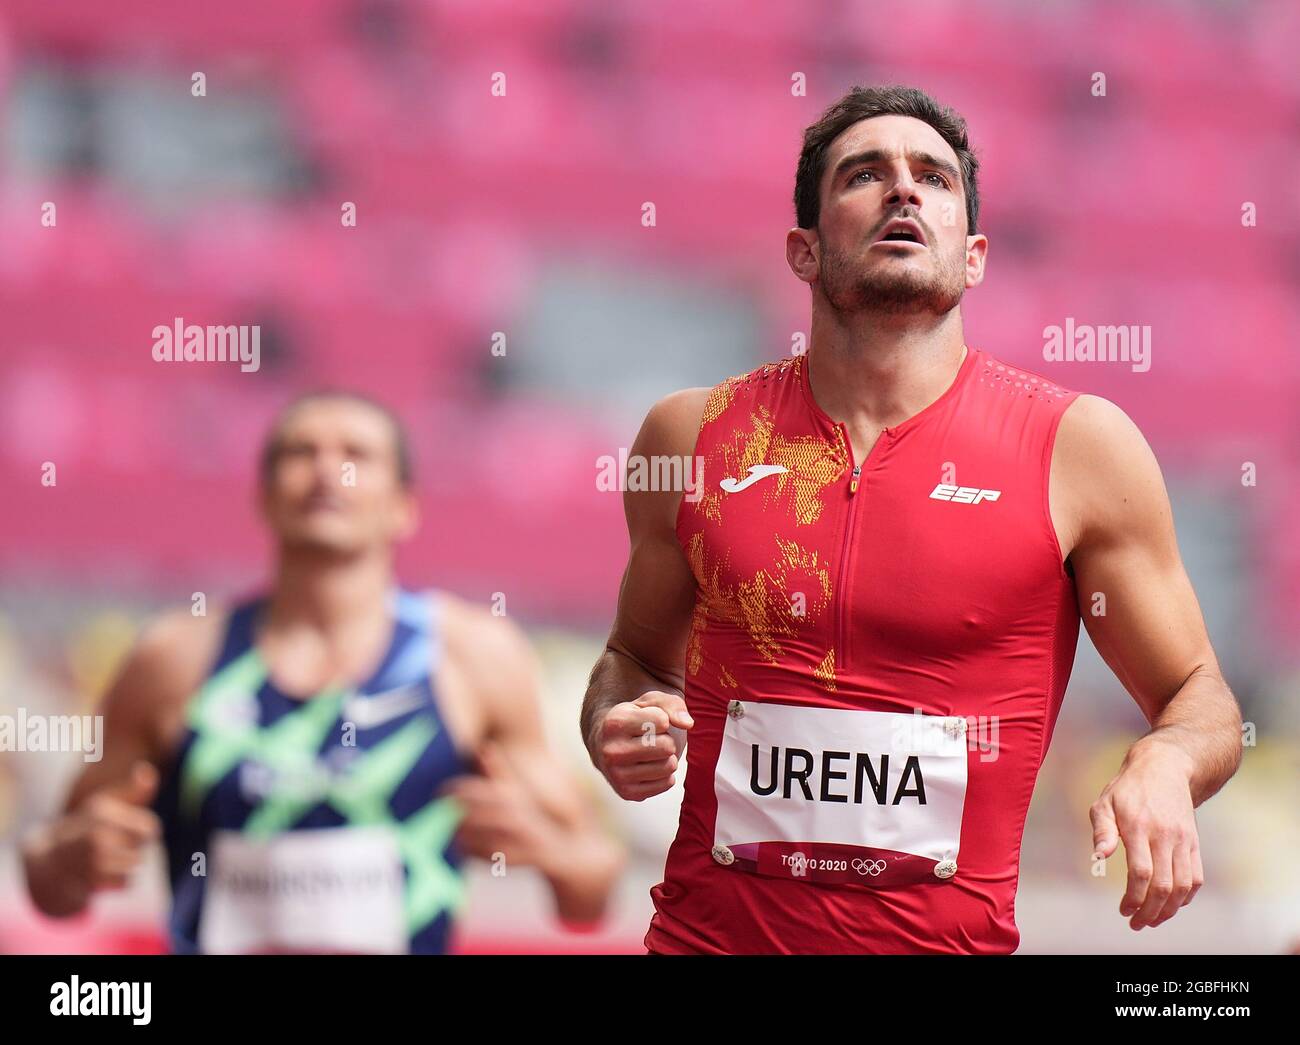 Tokyo, Japan. 4th Aug, 2021. Jorge Urena of Spain reacts after the Men's Decathlon 100m Heat at the Tokyo 2020 Olympic Games in Tokyo, Japan, Aug. 4, 2021. Credit: Lui Siu Wai/Xinhua/Alamy Live News Stock Photo